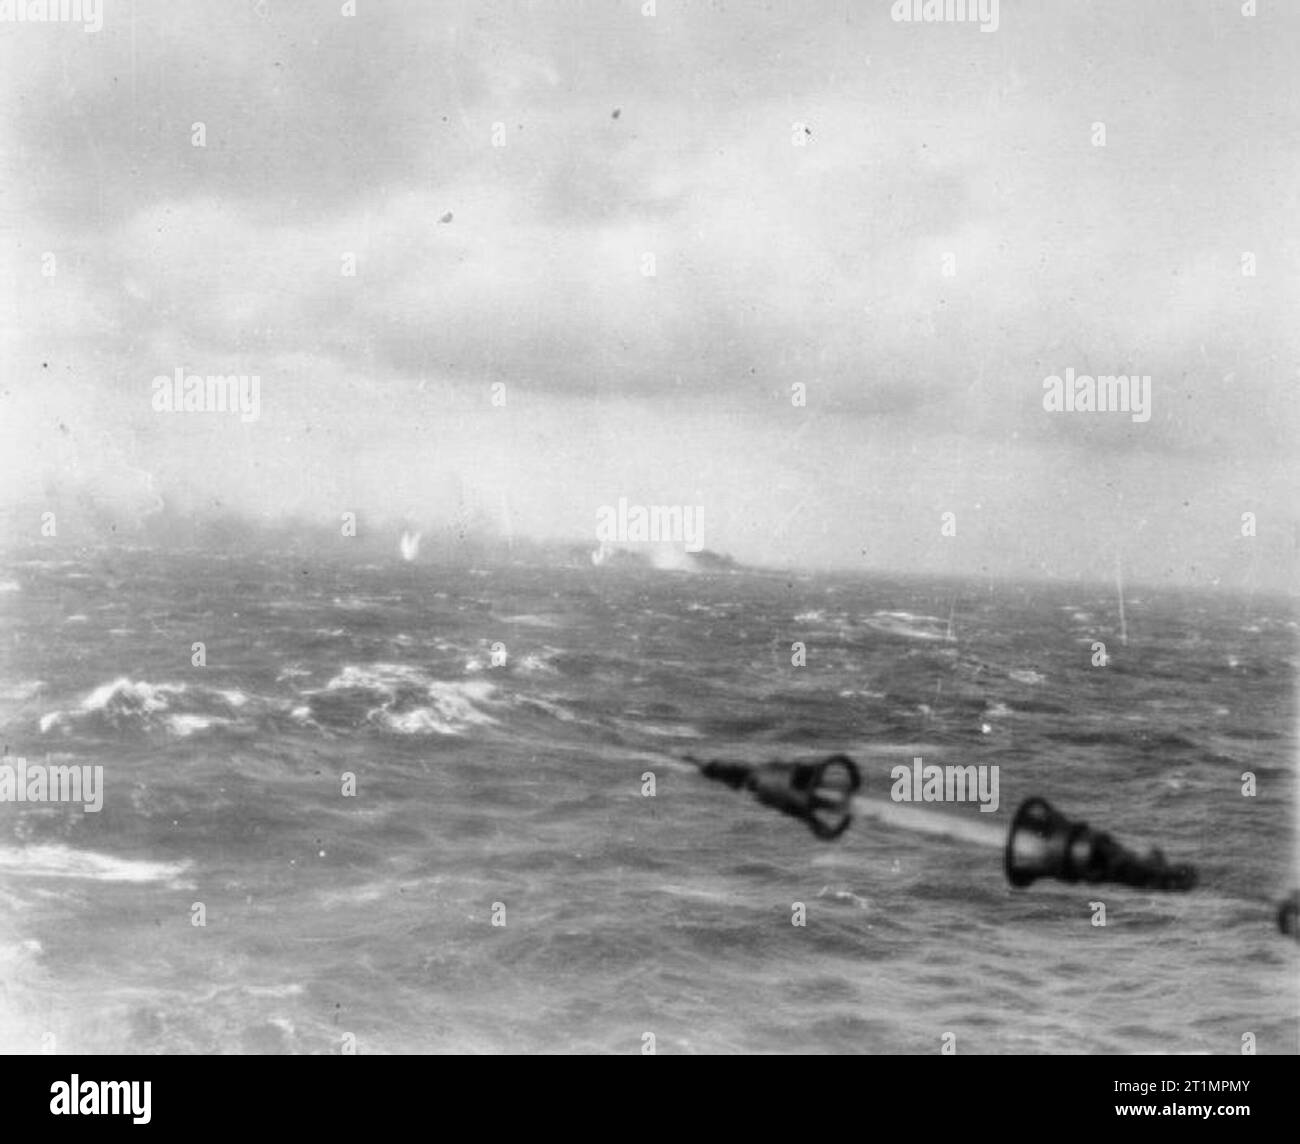 The Royal Navy during the Second World War The sinking of the German battleship BISMARCK: photograph of the BISMARCK on fire in the distance taken from one of the Royal Navy warships chasing. Stock Photo